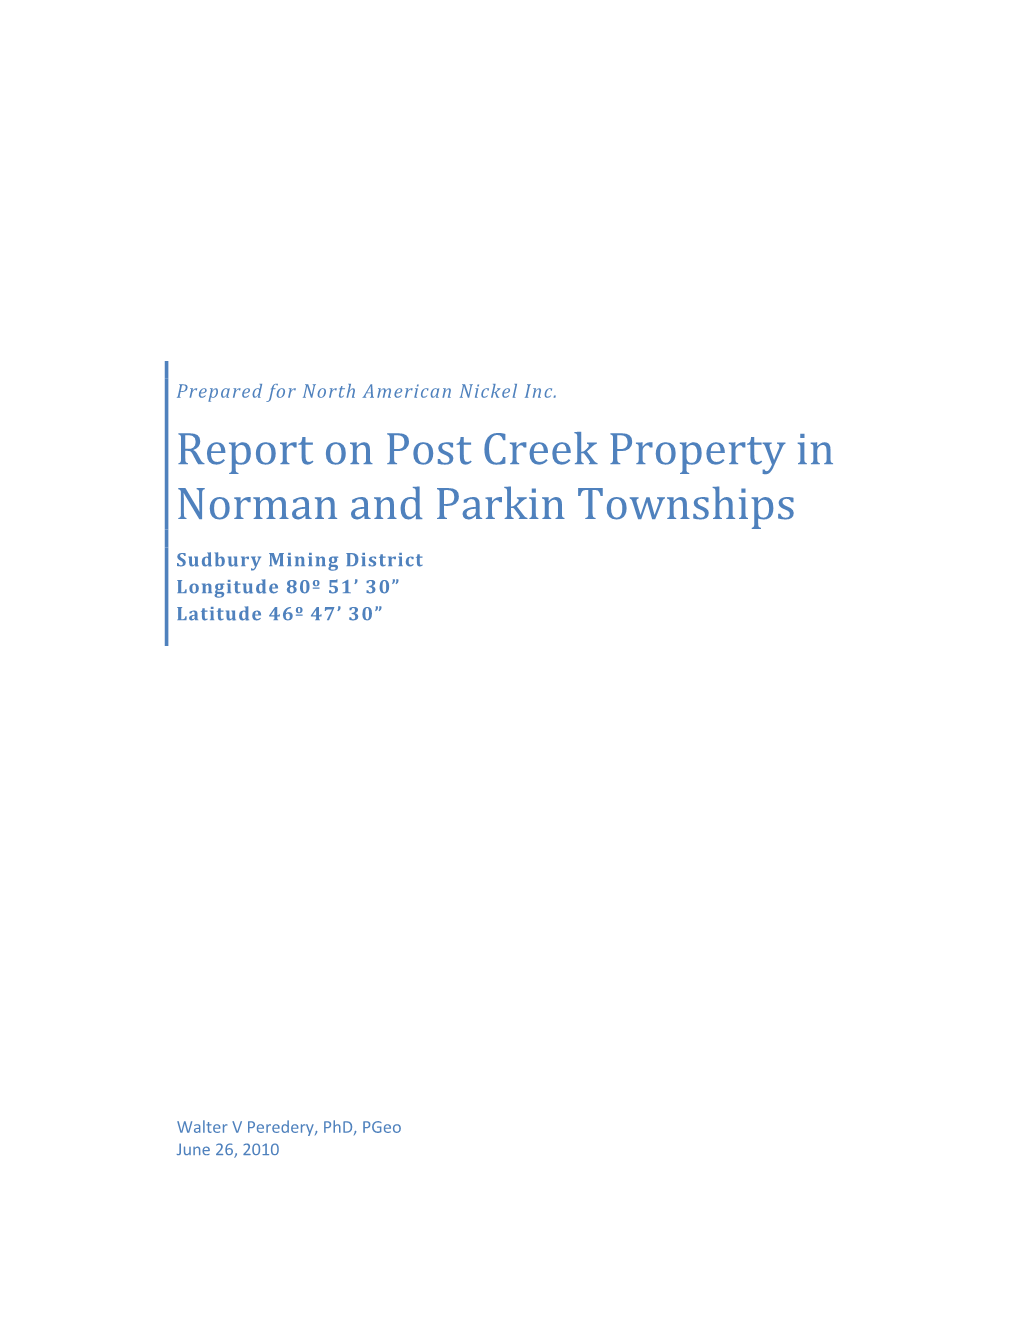 Report on Post Creek Property in Norman and Parkin Townships Sudbury Mining District Longitude 80º 51’ 30” Latitude 46º 47’ 30”